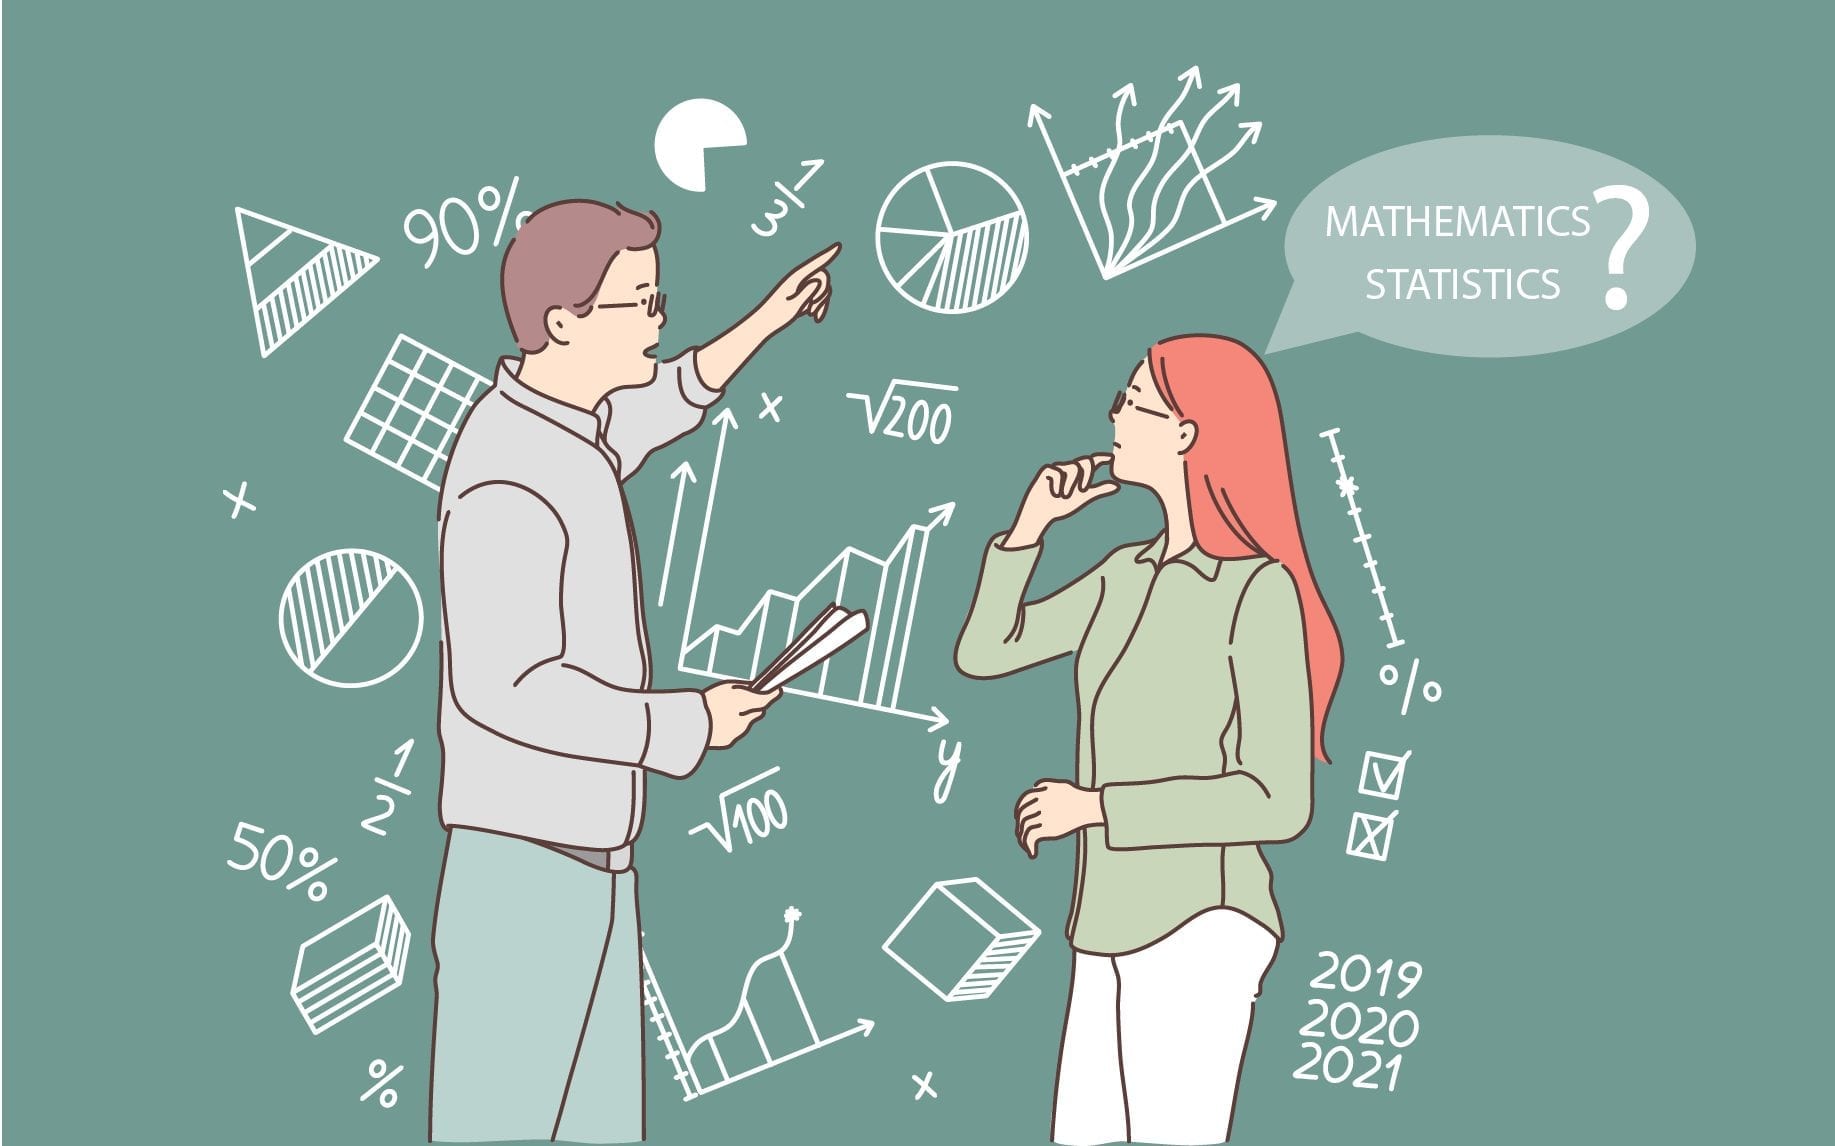 What is the difference between Mathematics and Statistics